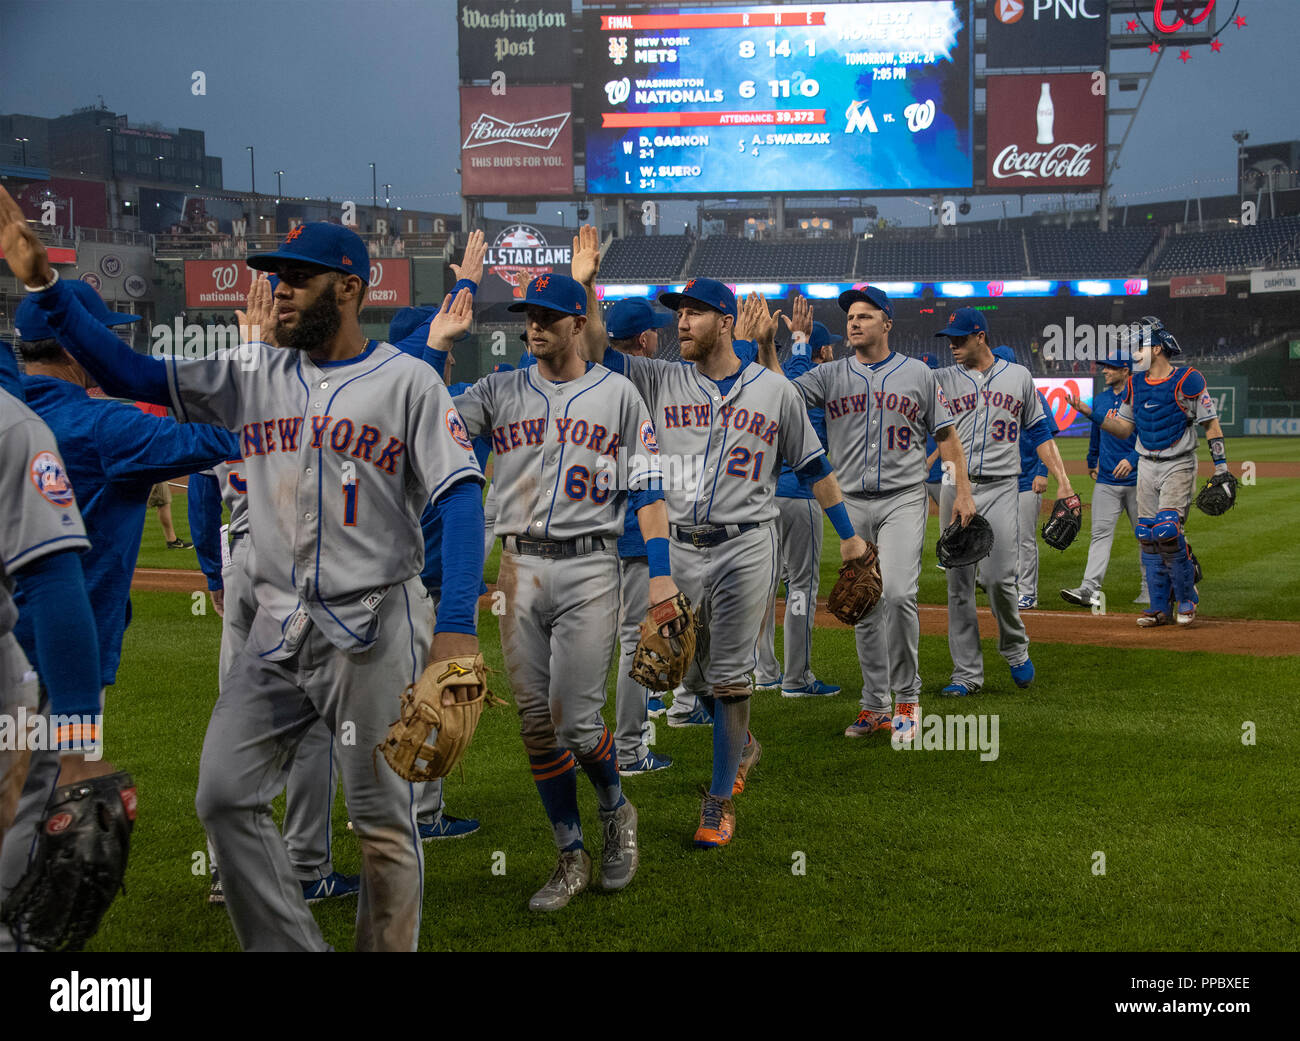 Washington, United States Of America. 23rd Sep, 2018. New York Mets celebrate their 8 - 6 victory over the Washington Nationals at Nationals Park in Washington, DC on Sunday, September 23, 2018. Credit: Ron Sachs/CNP (RESTRICTION: NO New York or New Jersey Newspapers or newspapers within a 75 mile radius of New York City) | usage worldwide Credit: dpa/Alamy Live News Stock Photo